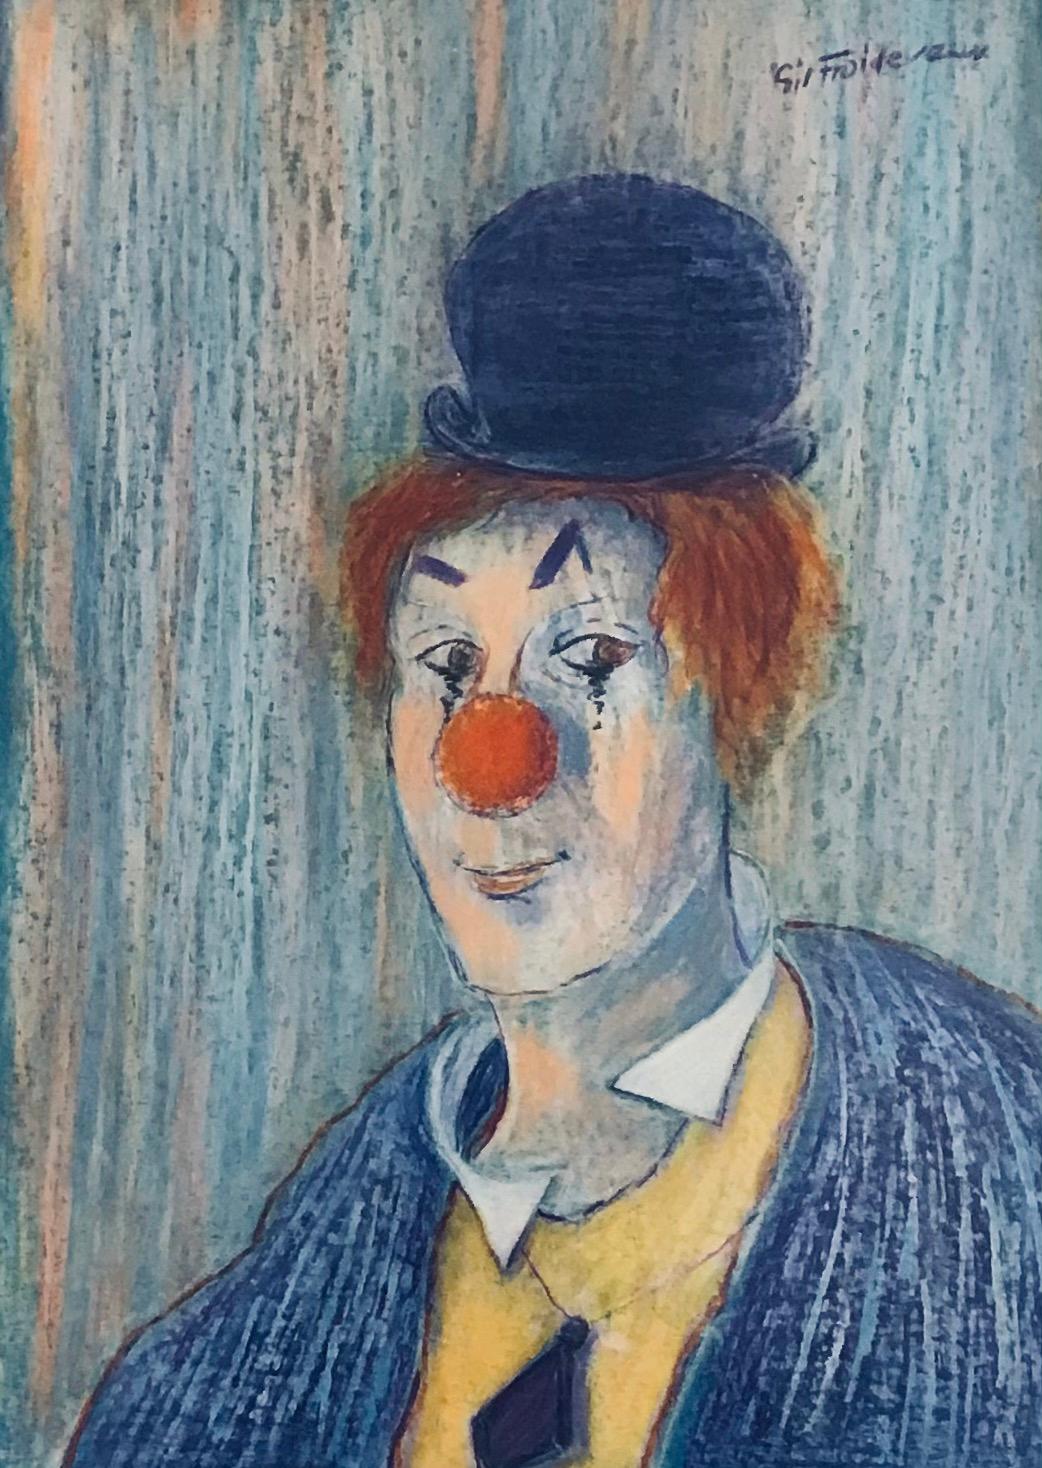 The clown by Gil Froidevaux - Pastel on paper 